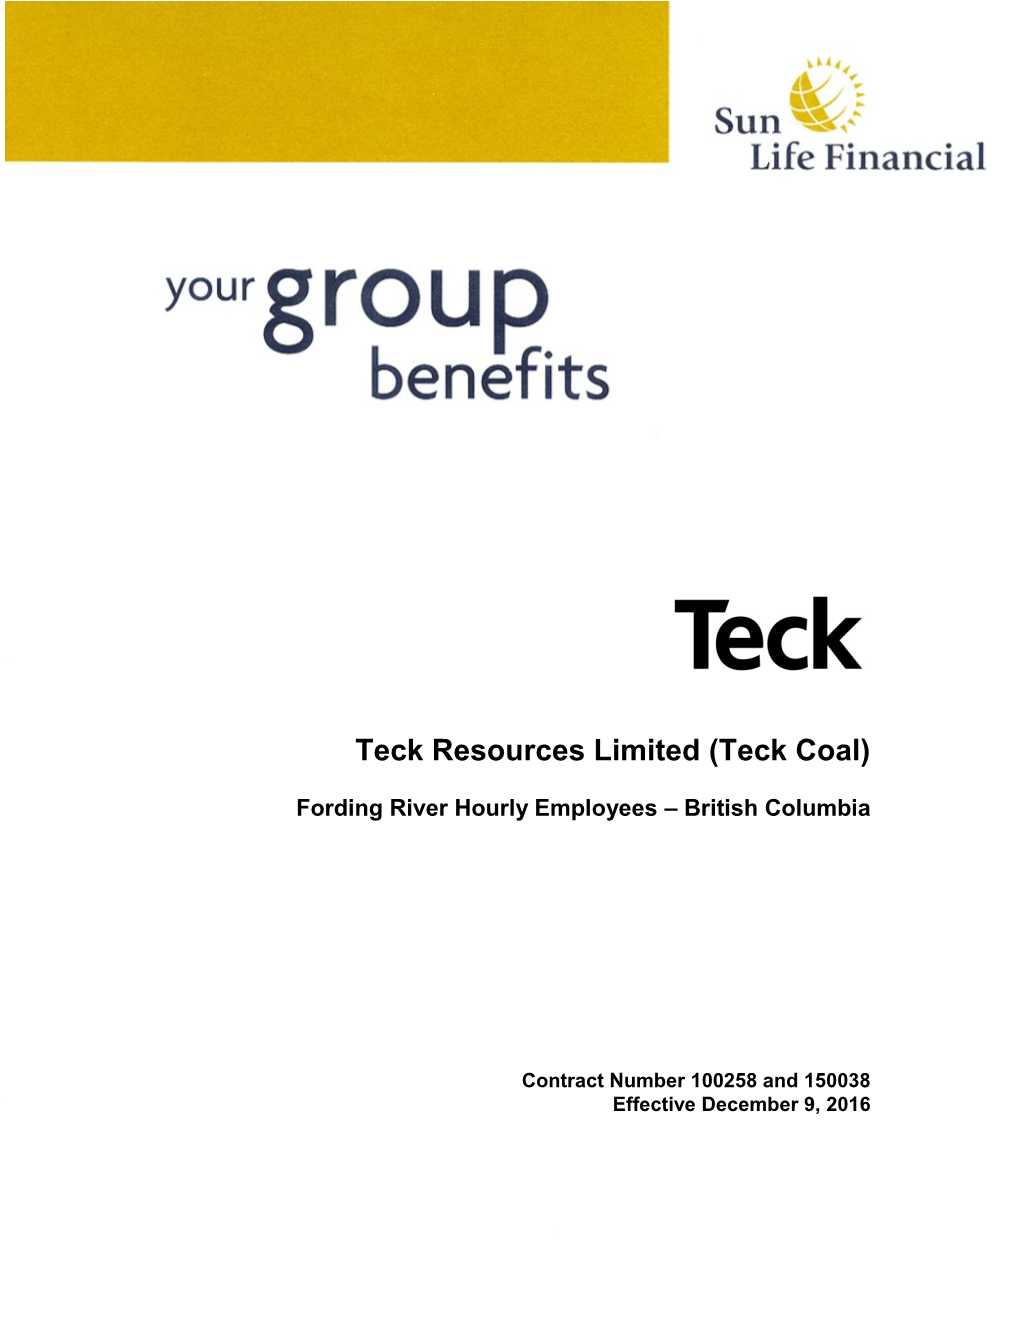 Teck Resources Limited (Teck Coal)